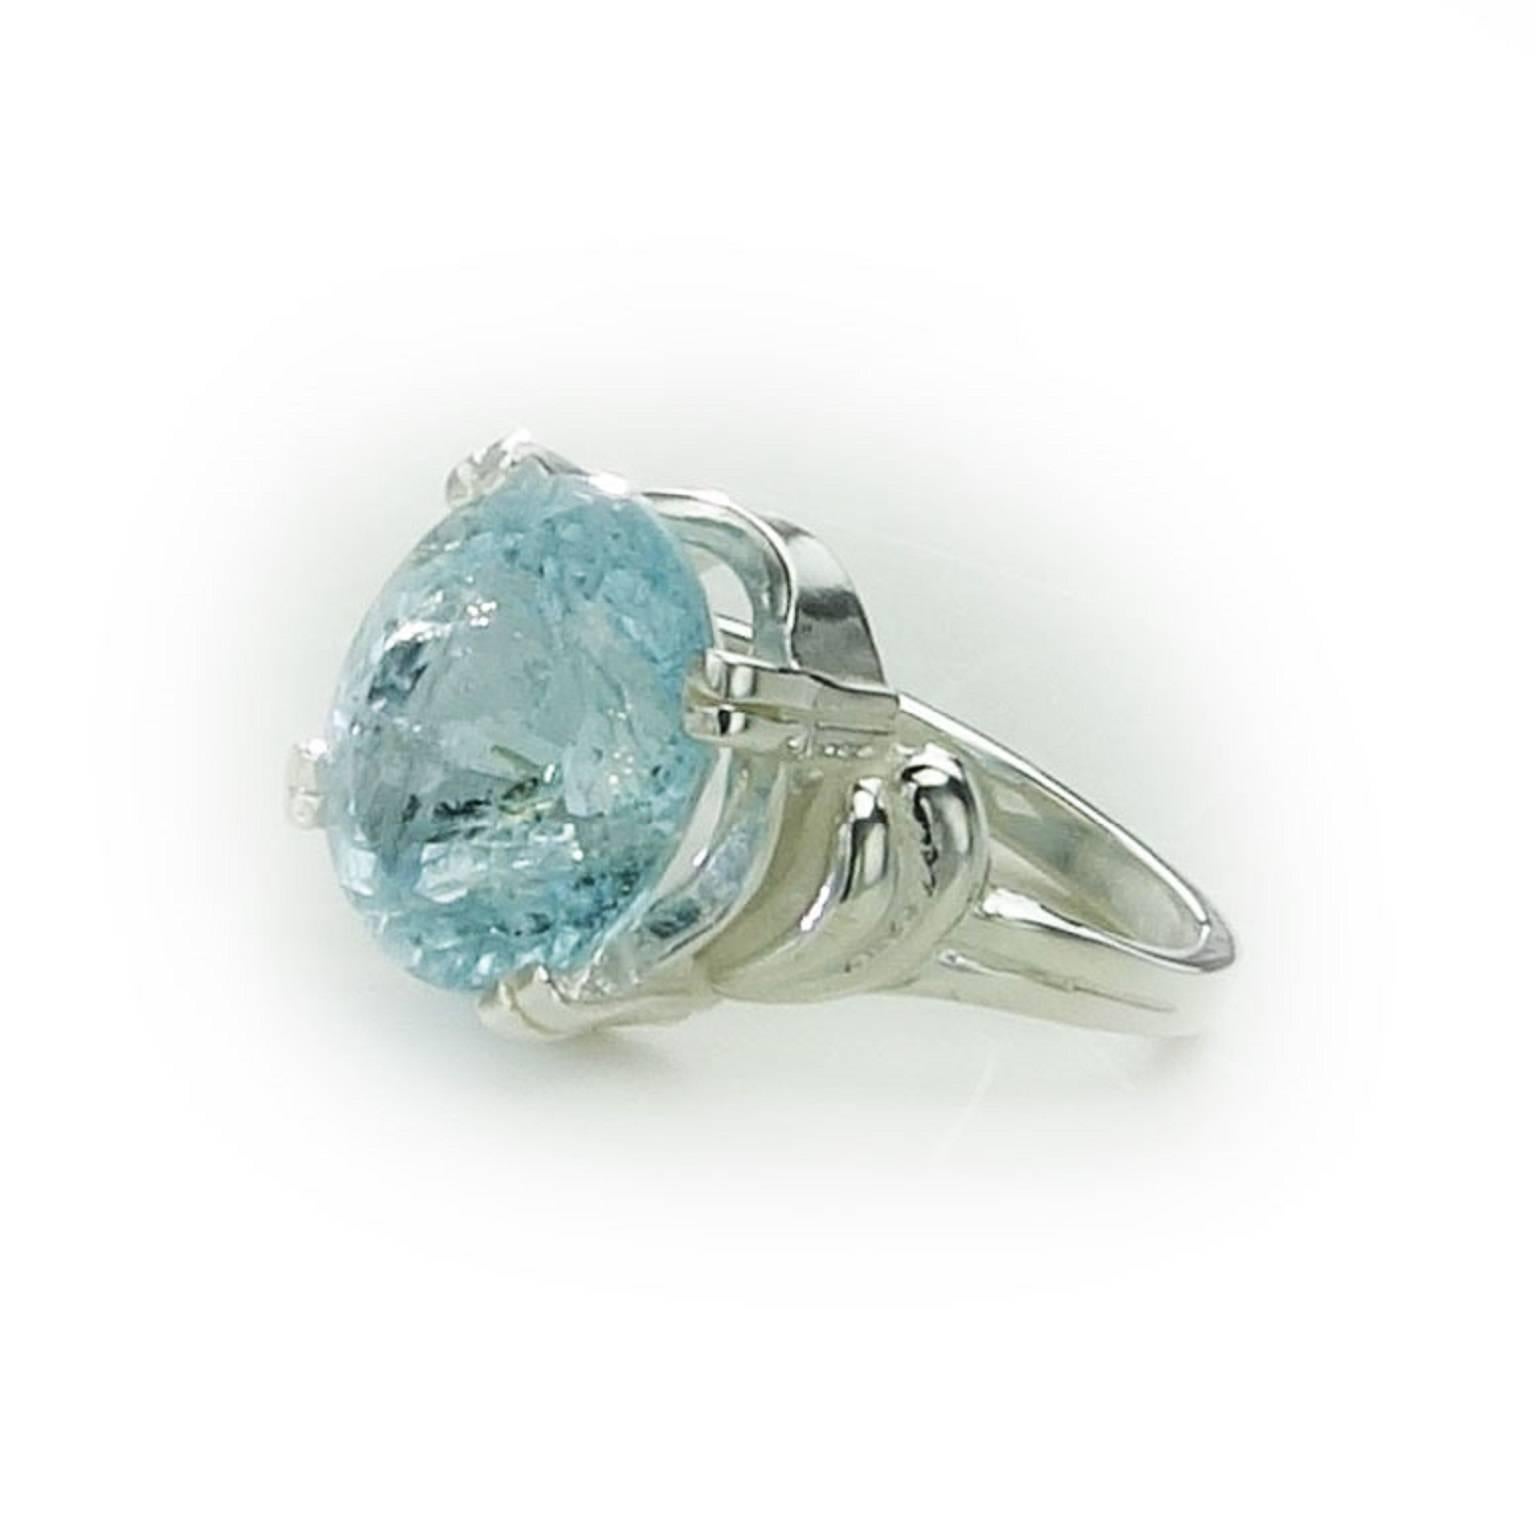 Oval Aquamarine in Sterling Silver Ring 1